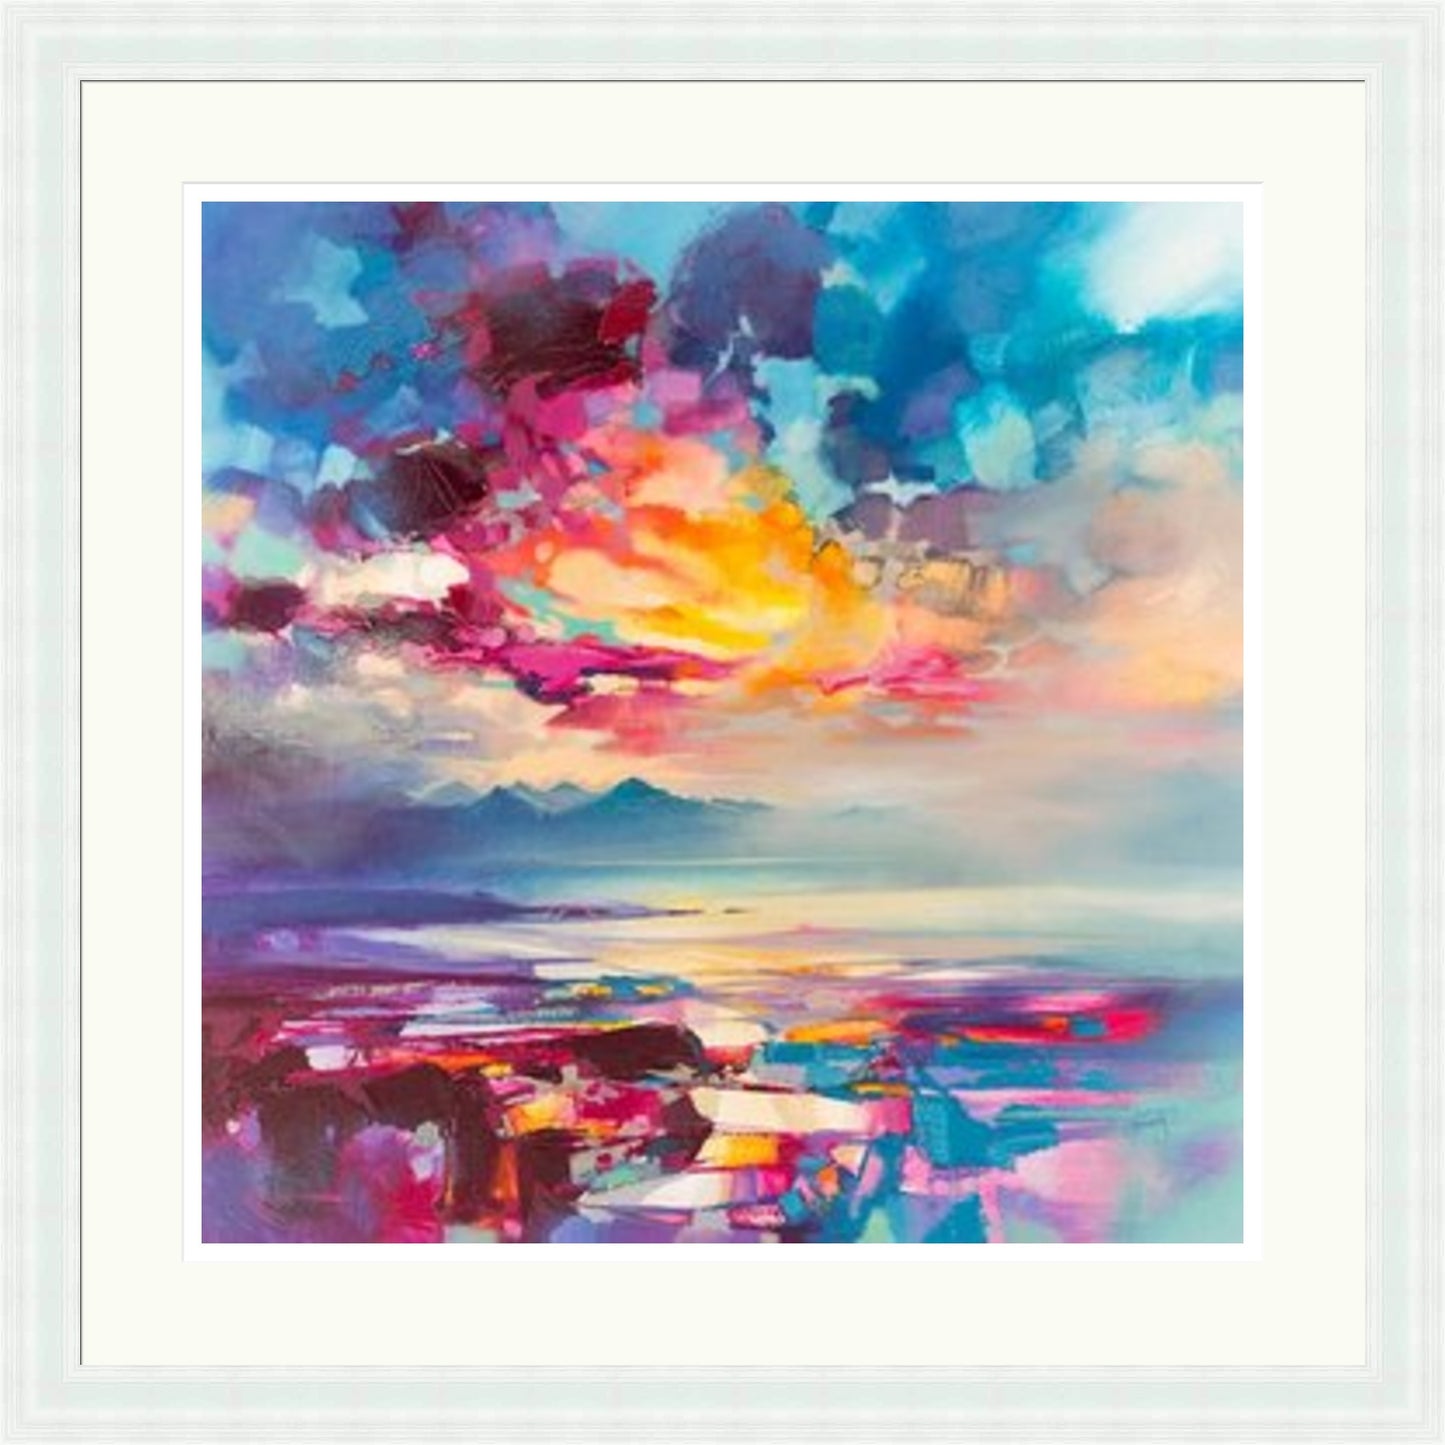 Cuillins Emerge (Limited Edition) by Scott Naismith